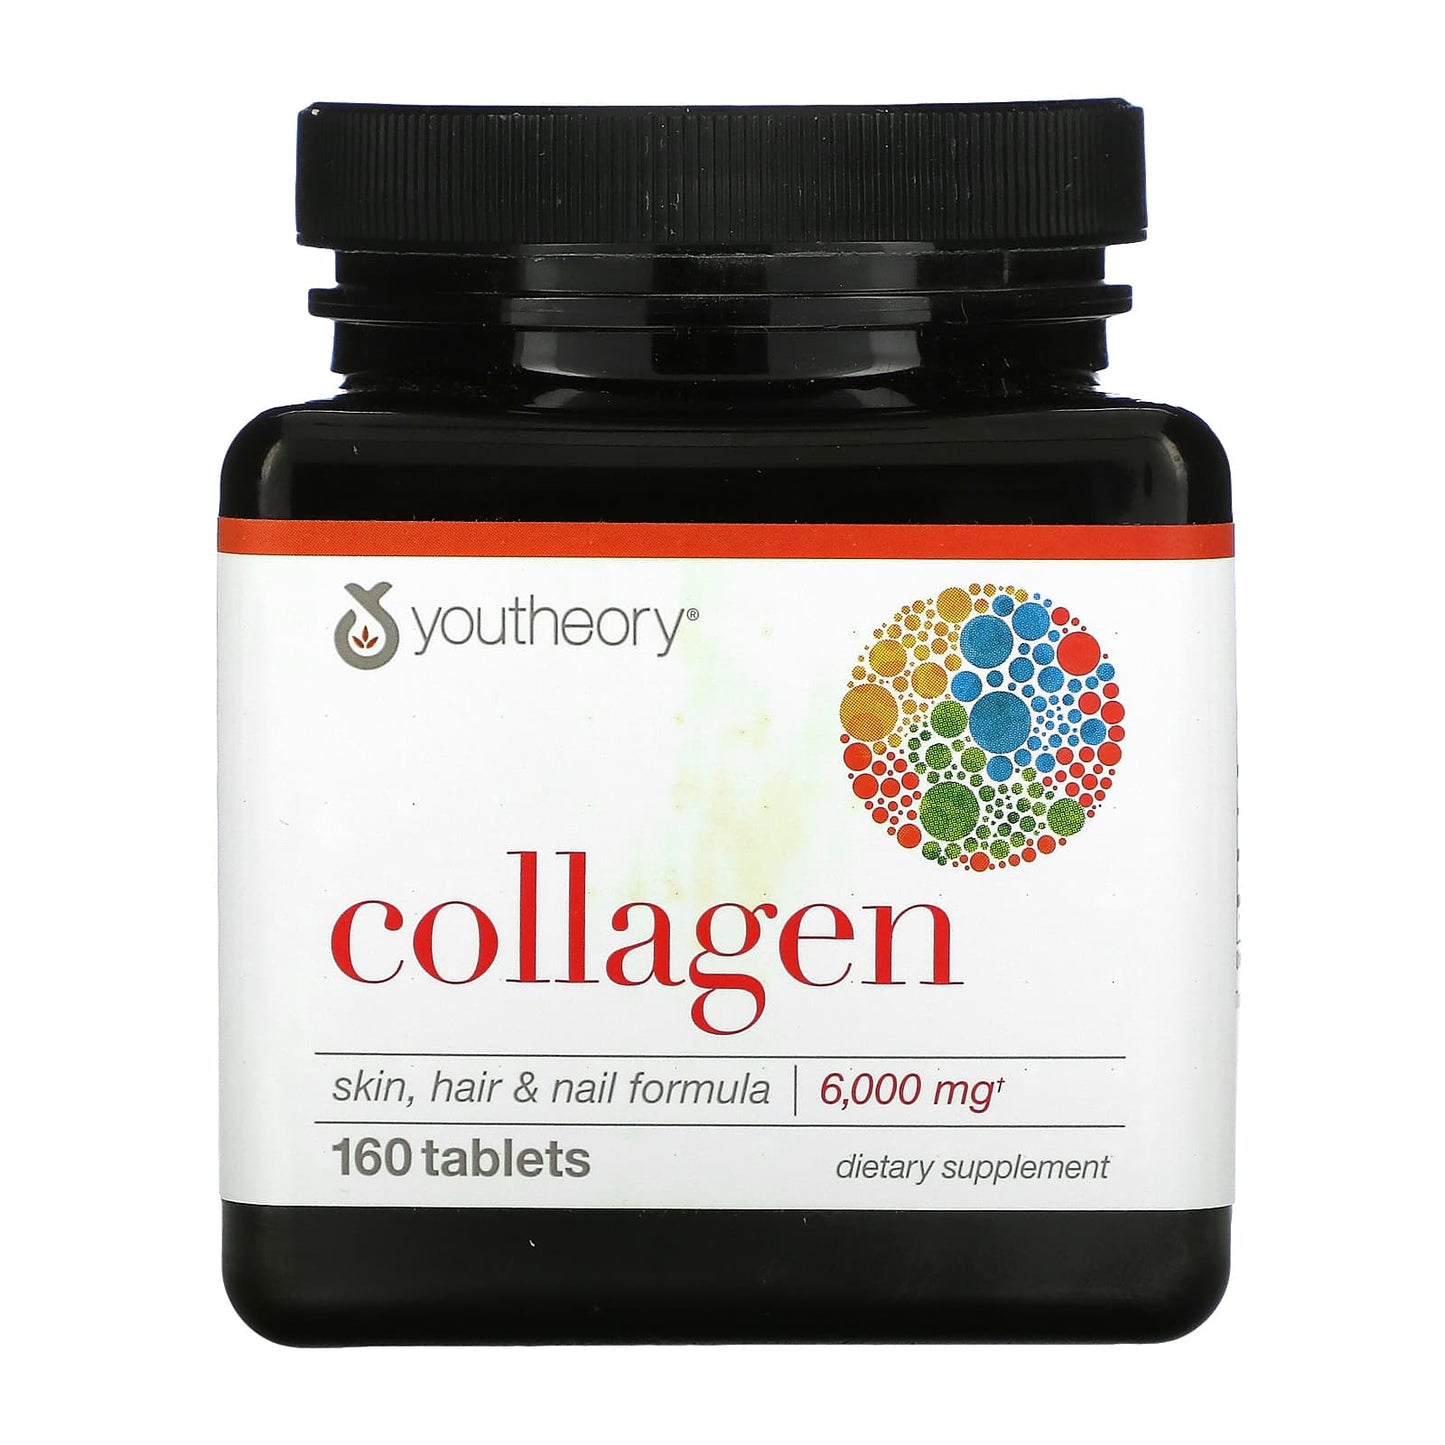 Youtheory-Collagen-6,000 mg-160 Tablets (1,000 mg per Tablet)